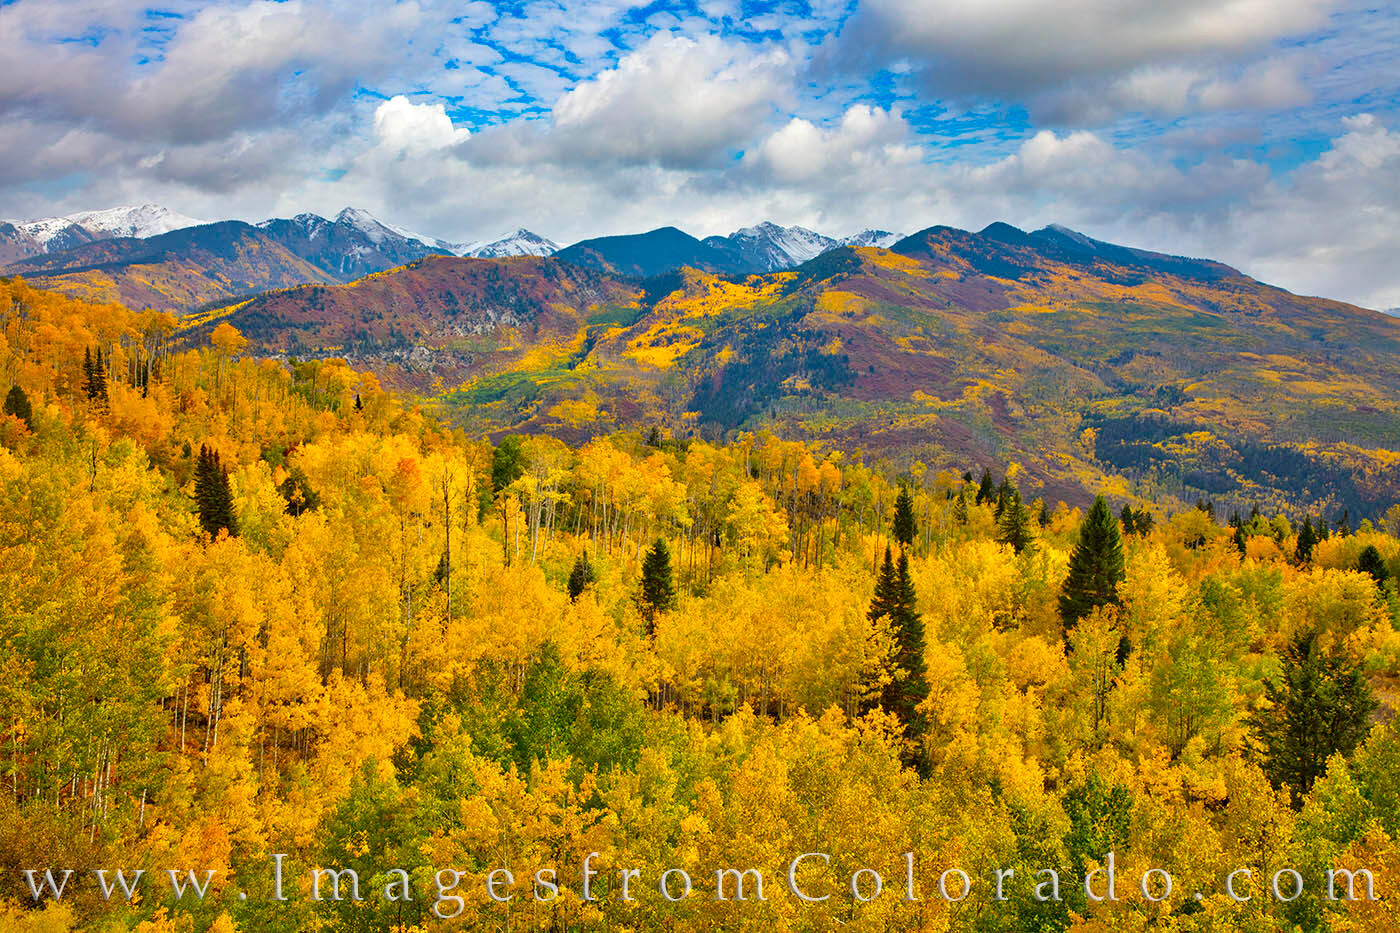 From high up on McClure Pass (8,755’), the aspen in Autumn show their brilliant gold and orange colors. Highway 133 runs up...